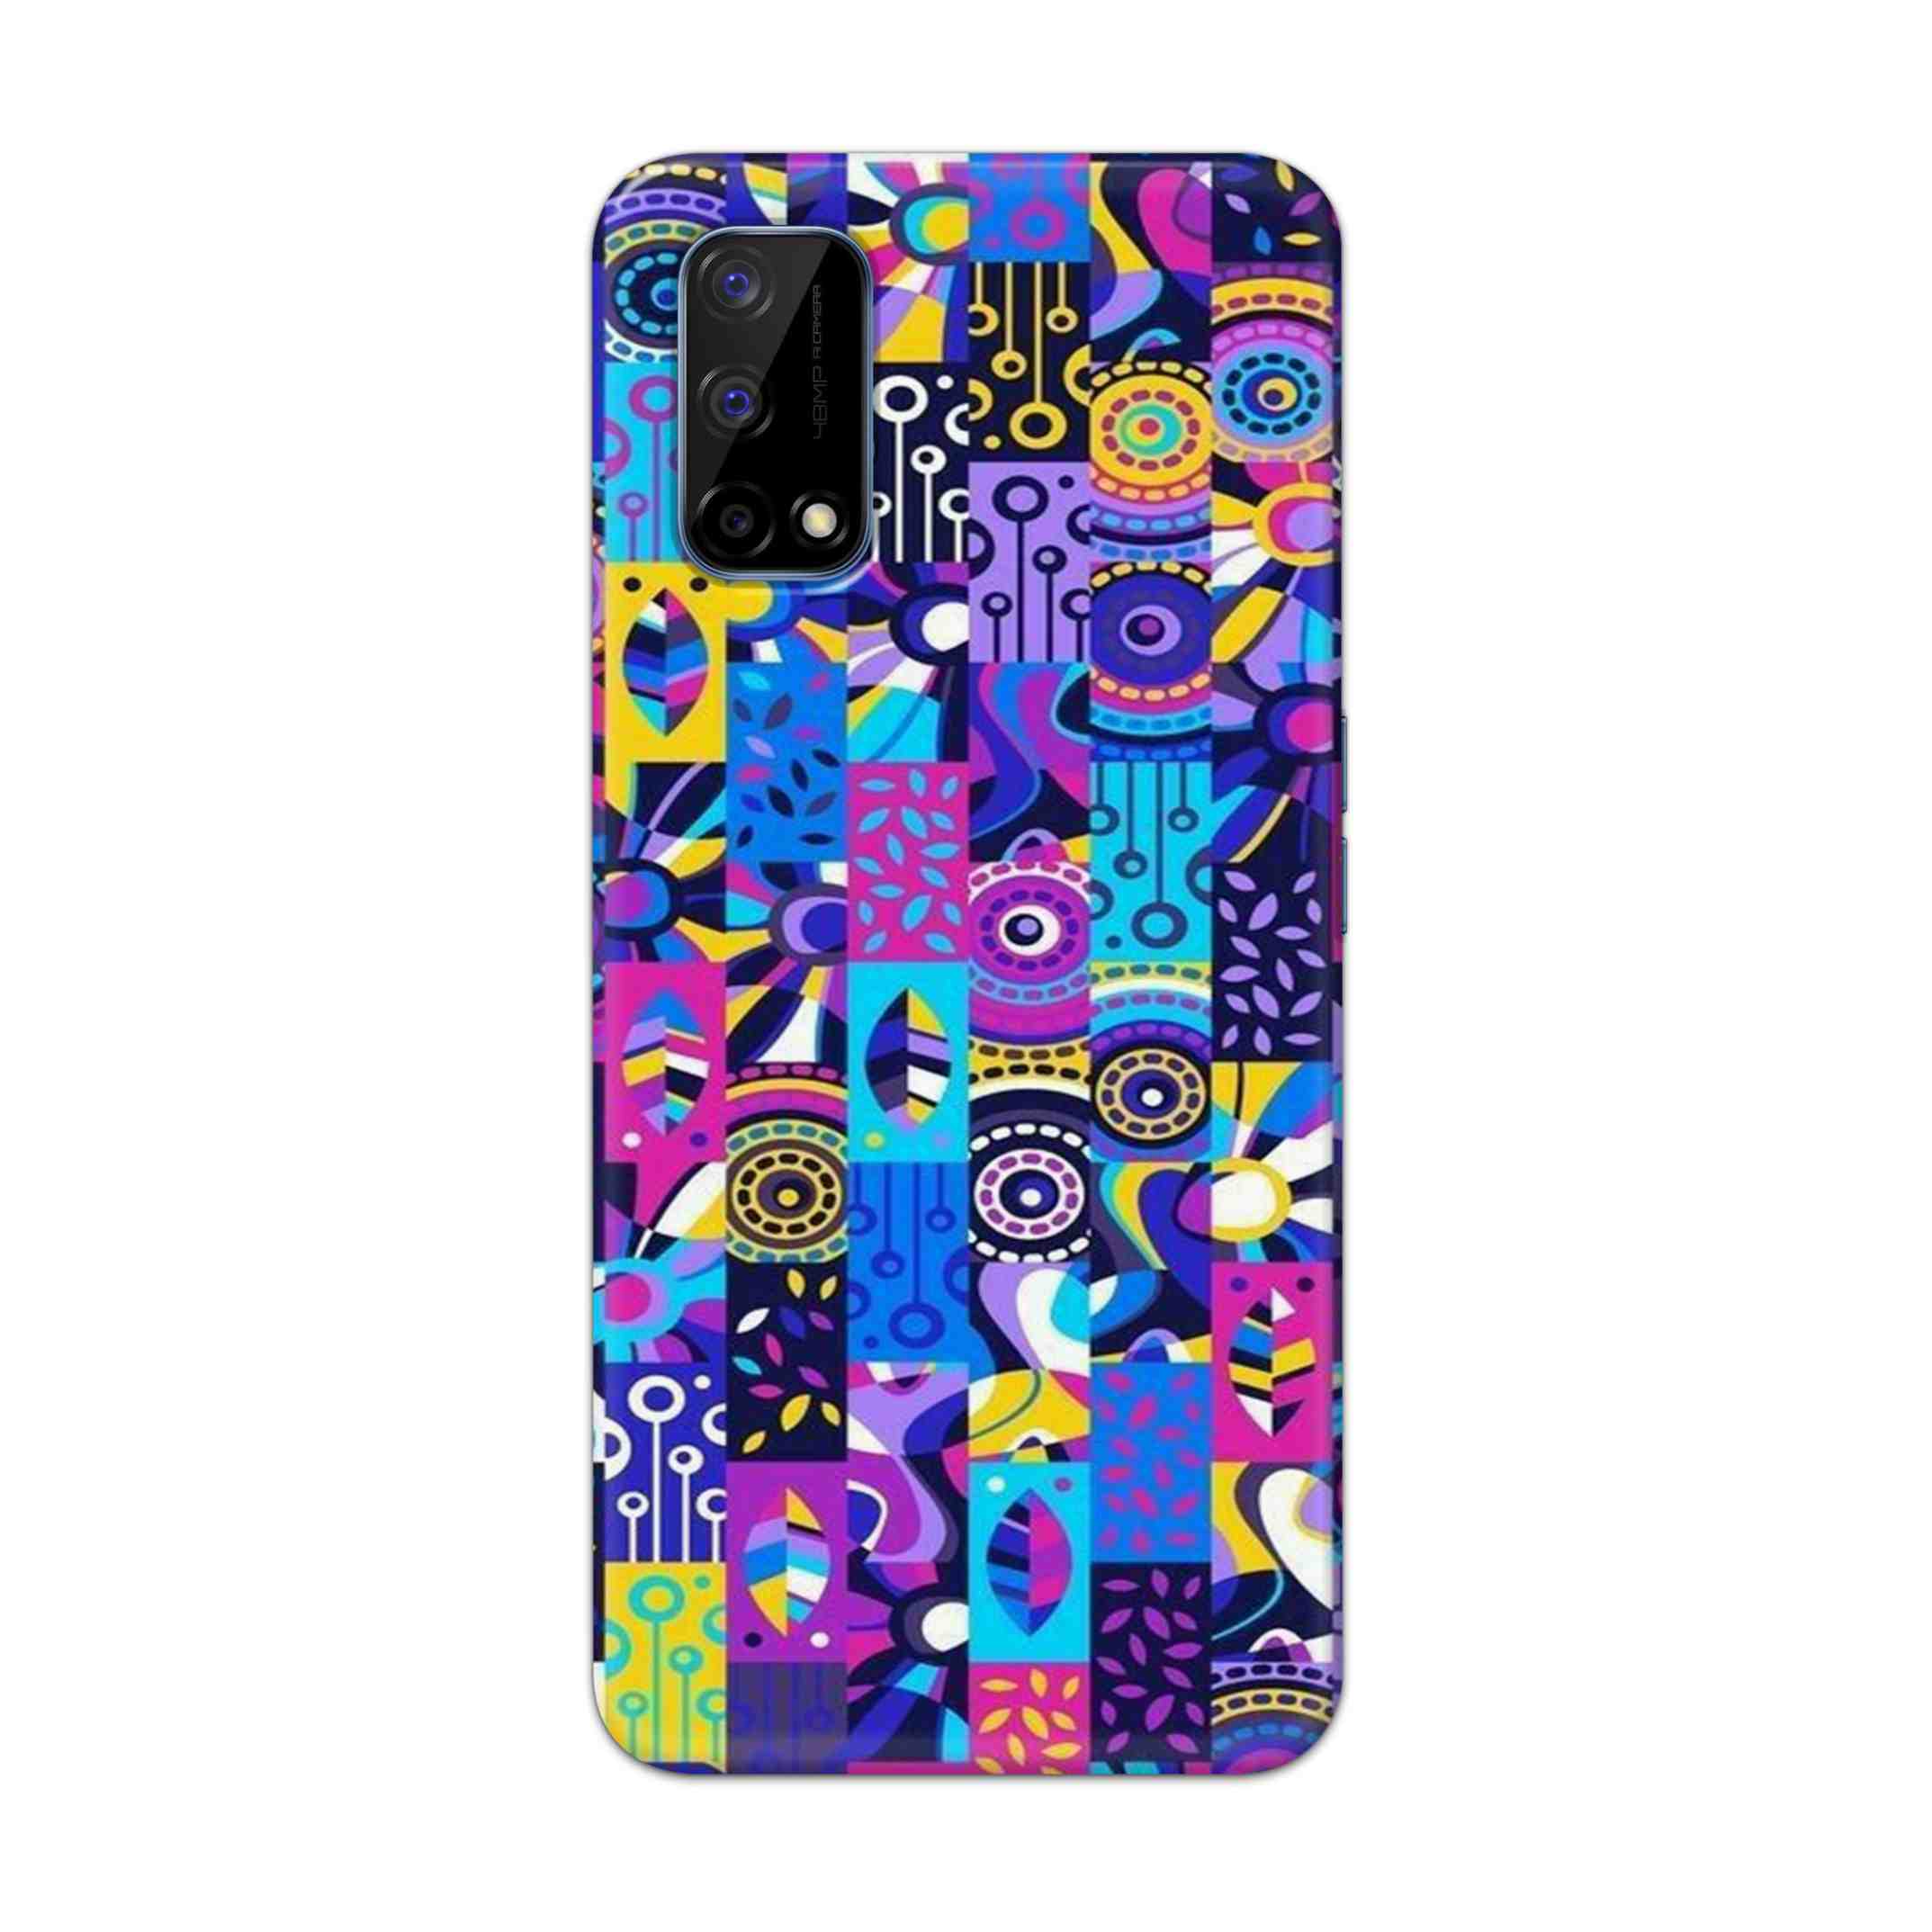 Buy Rainbow Art Hard Back Mobile Phone Case Cover For Realme Narzo 30 Pro Online